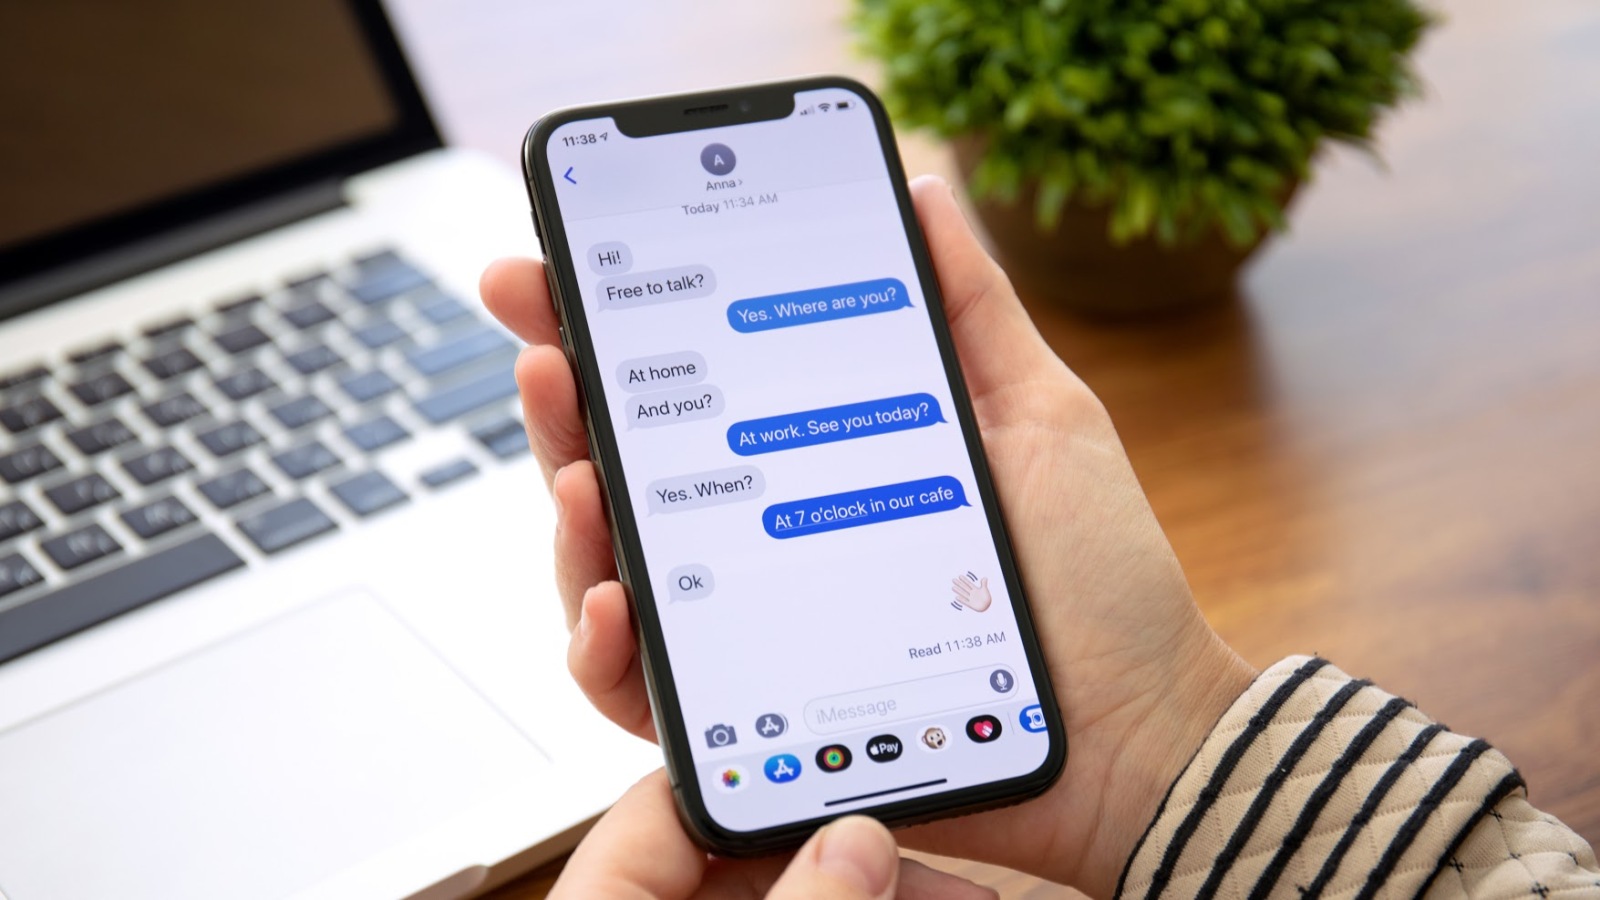 How to make Siri read messages aloud automatically